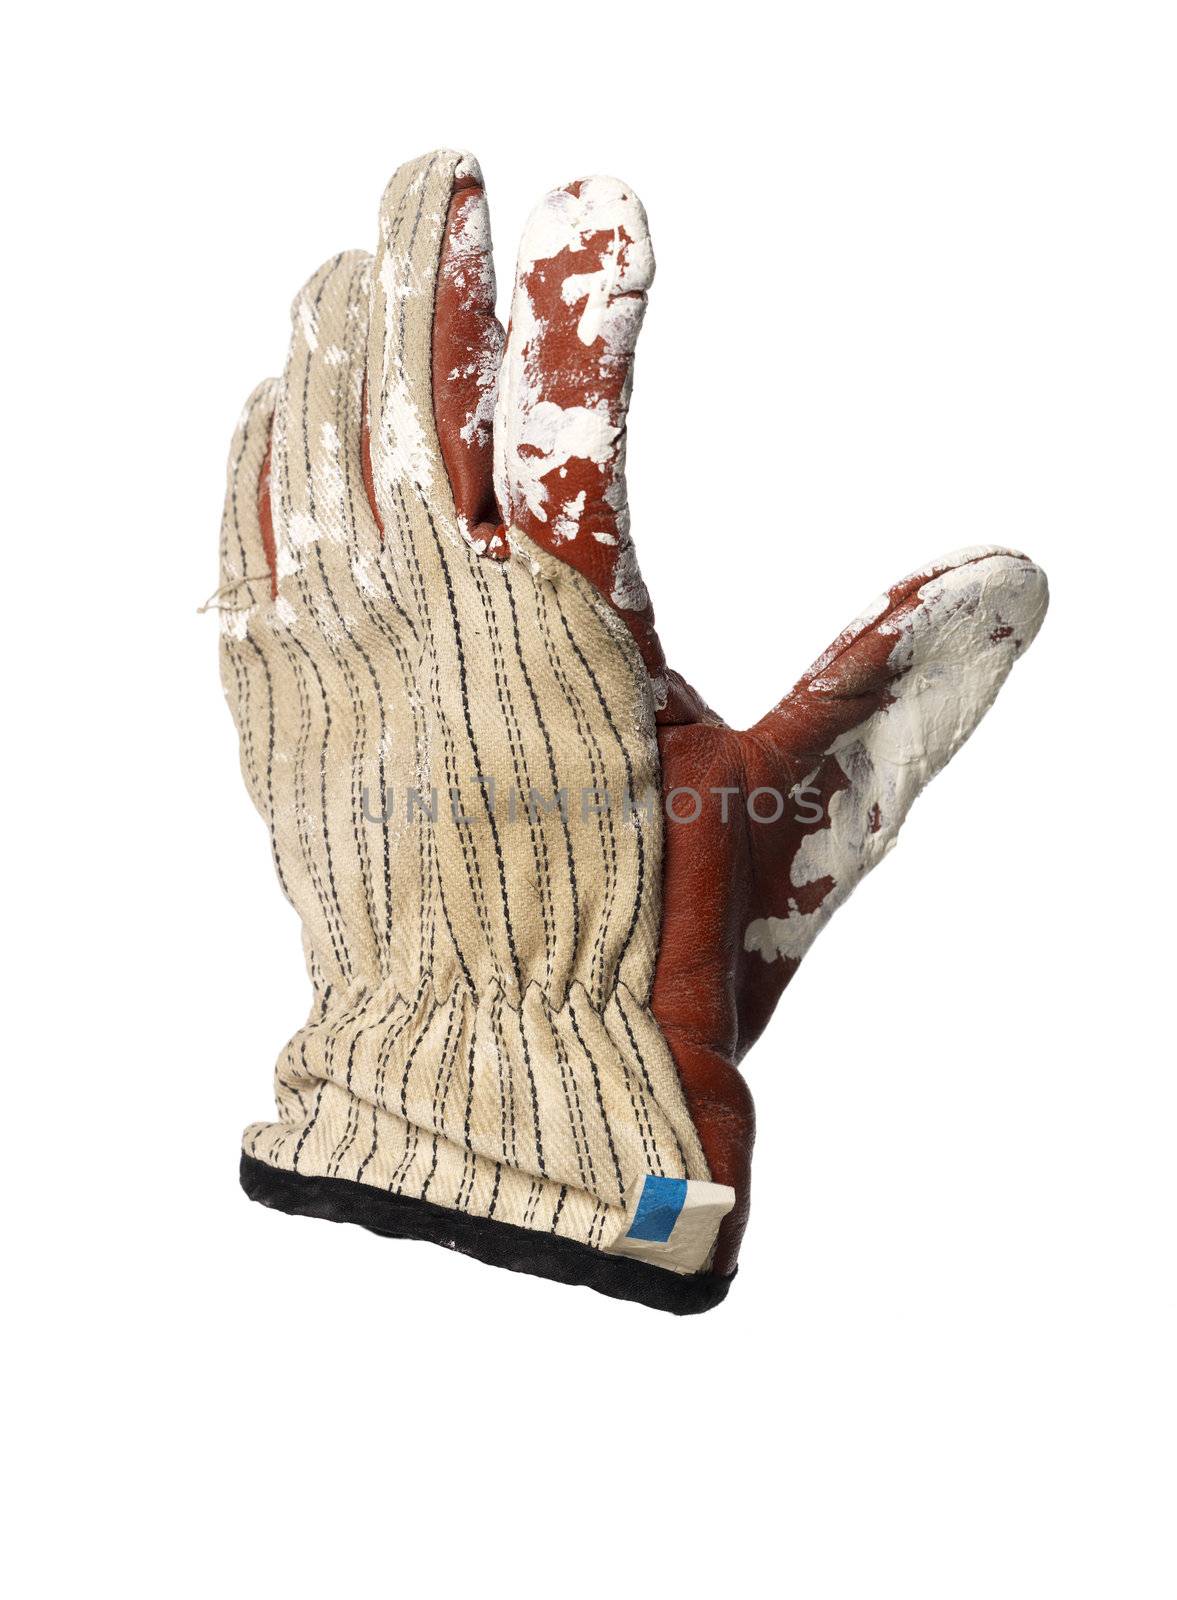 Dirty protection glove by gemenacom